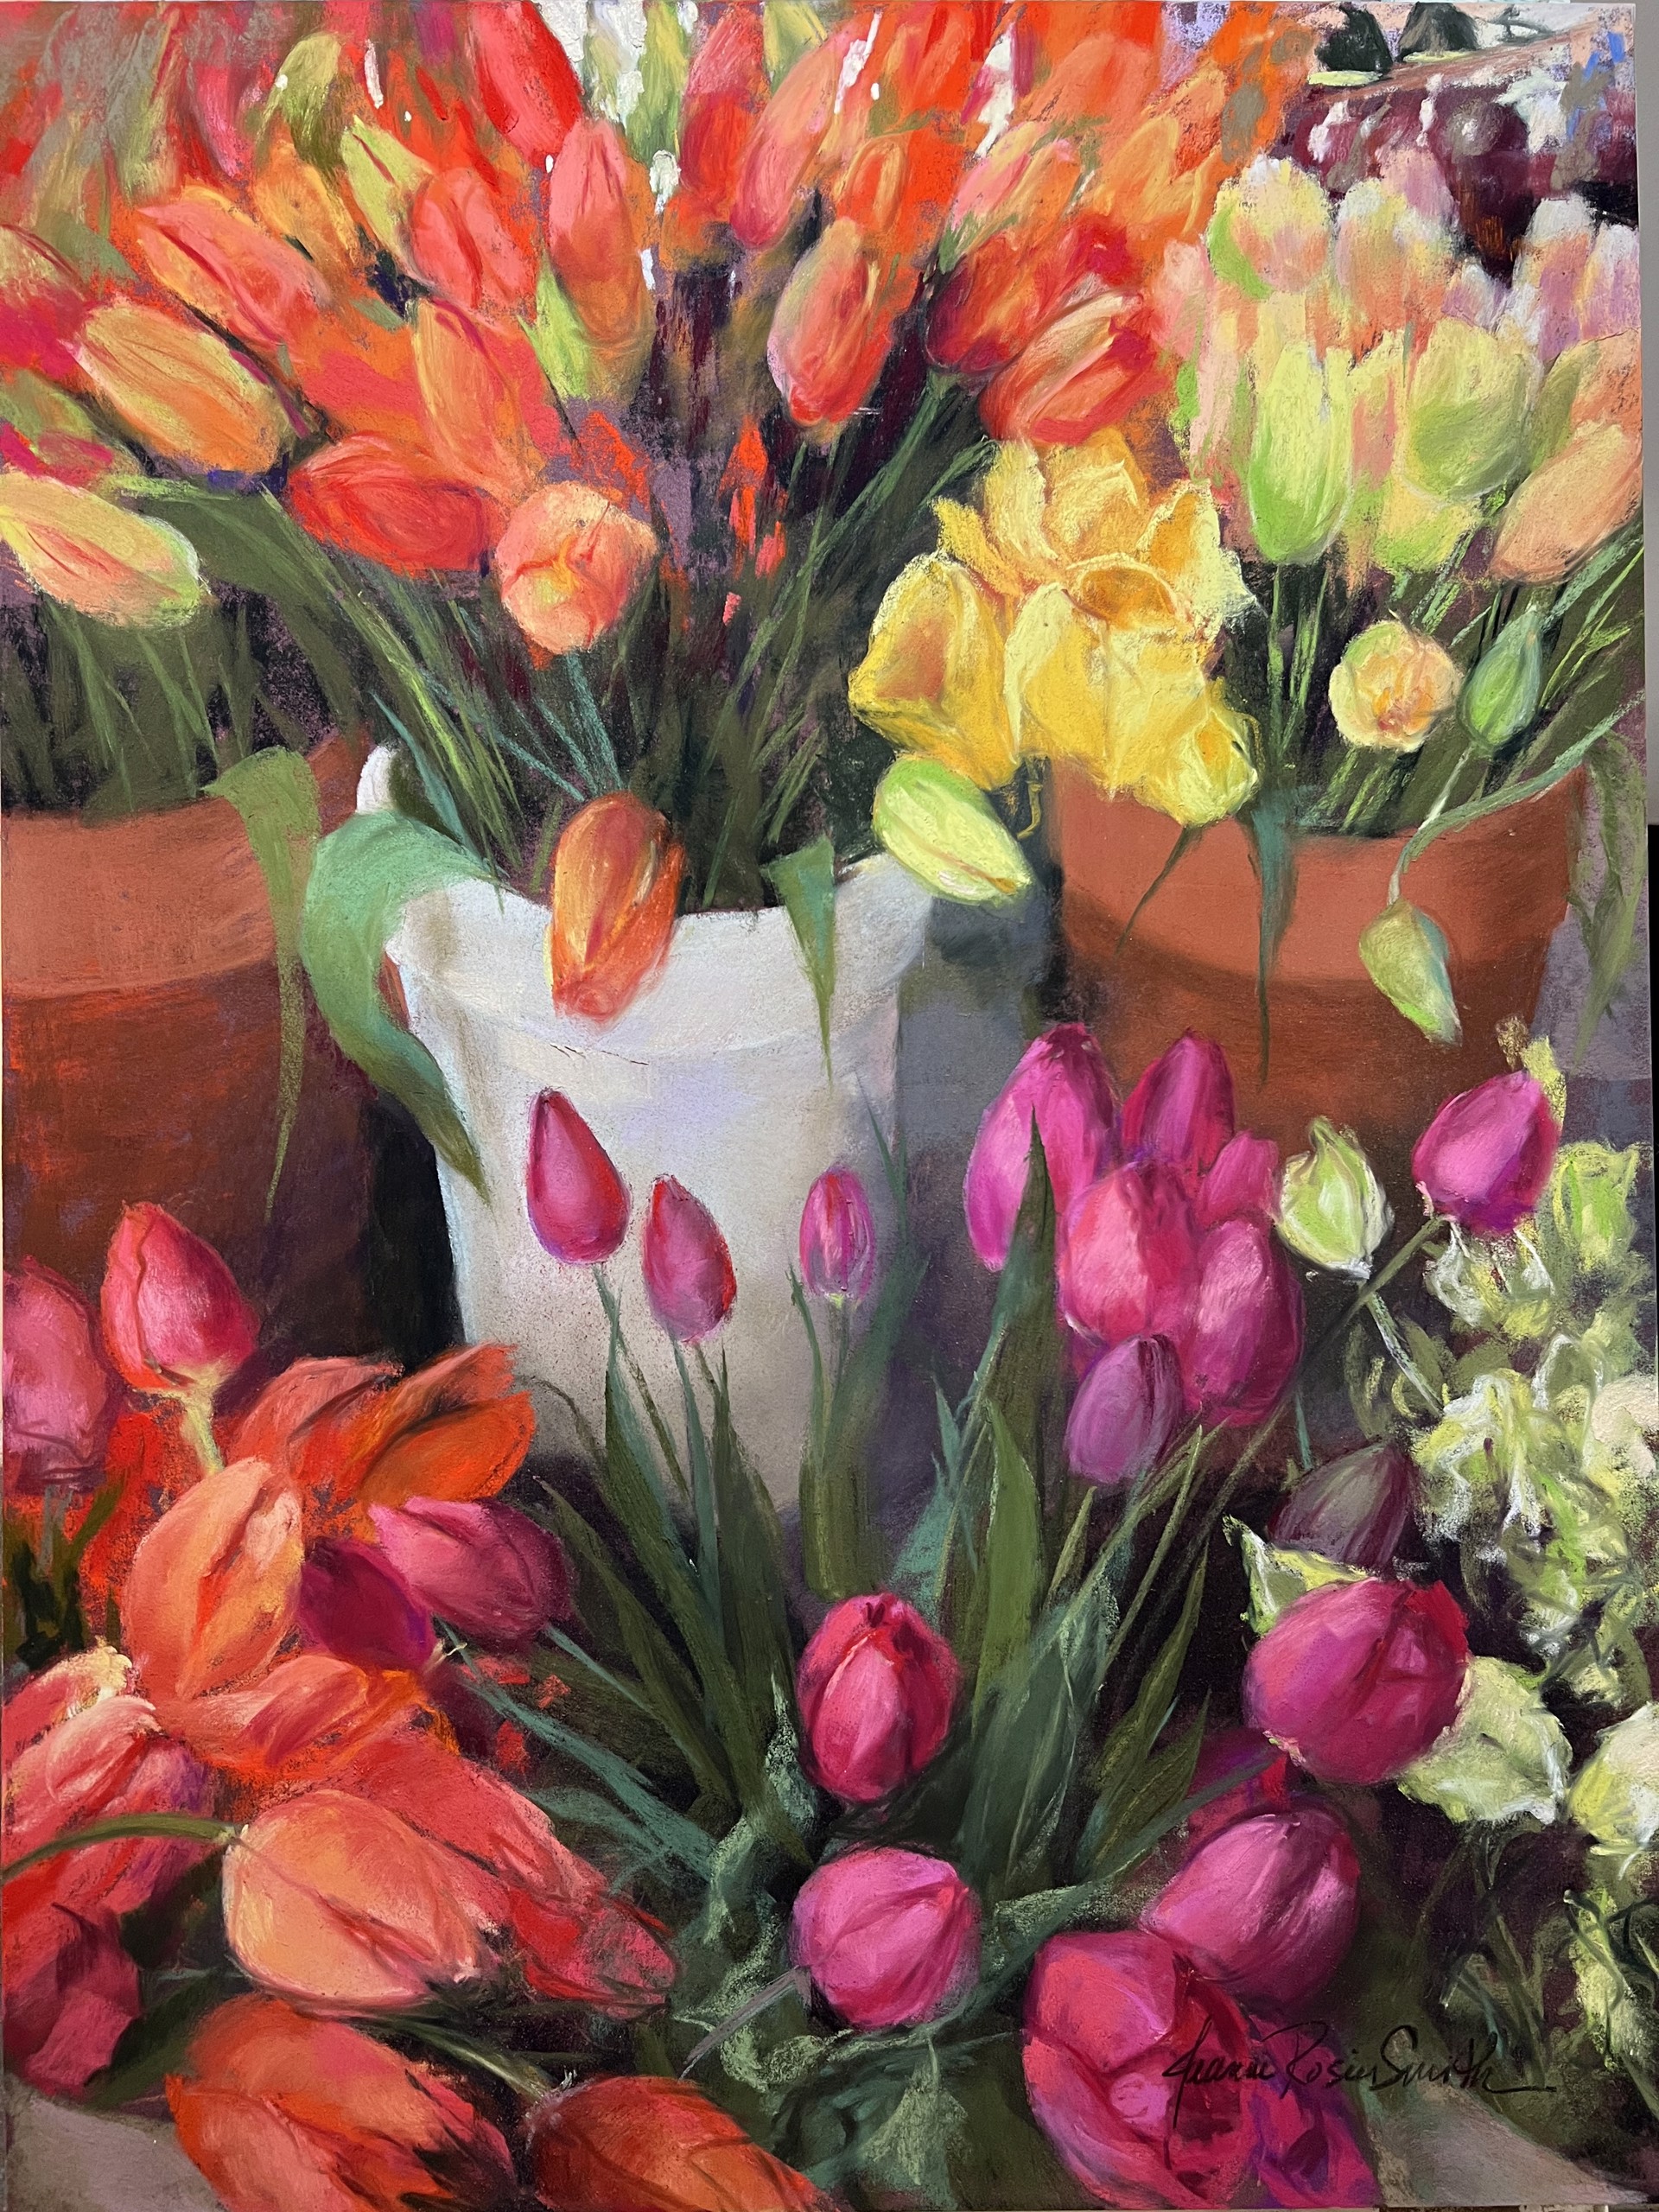 A Burst of Spring by JEANNE ROSIER SMITH